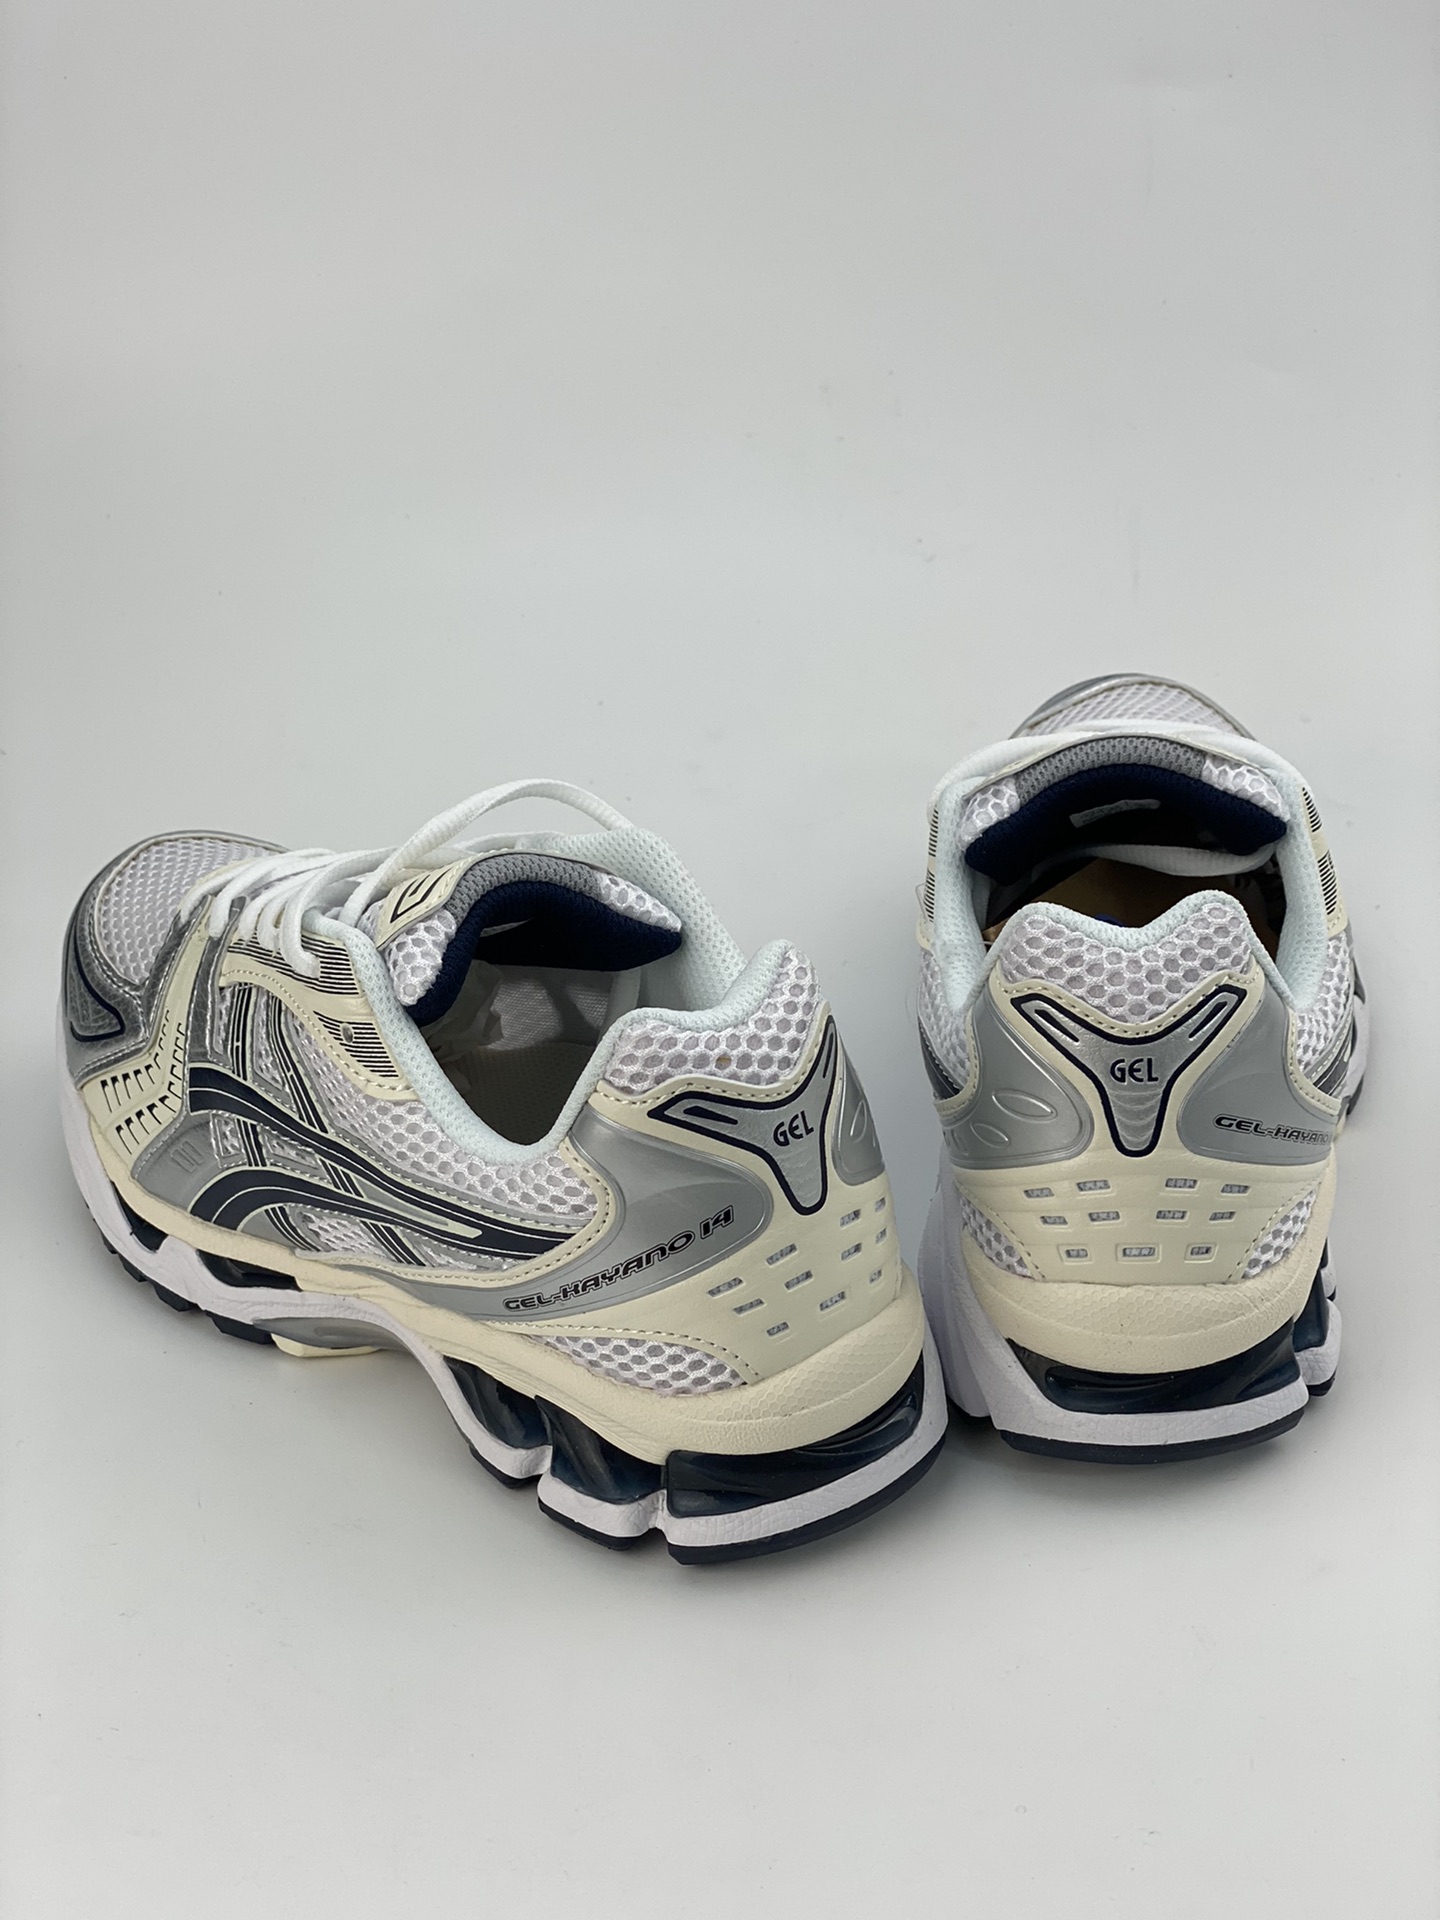 Asics Gel-Kayano 14 version sports casual breathable professional running shoes 1201A056-109